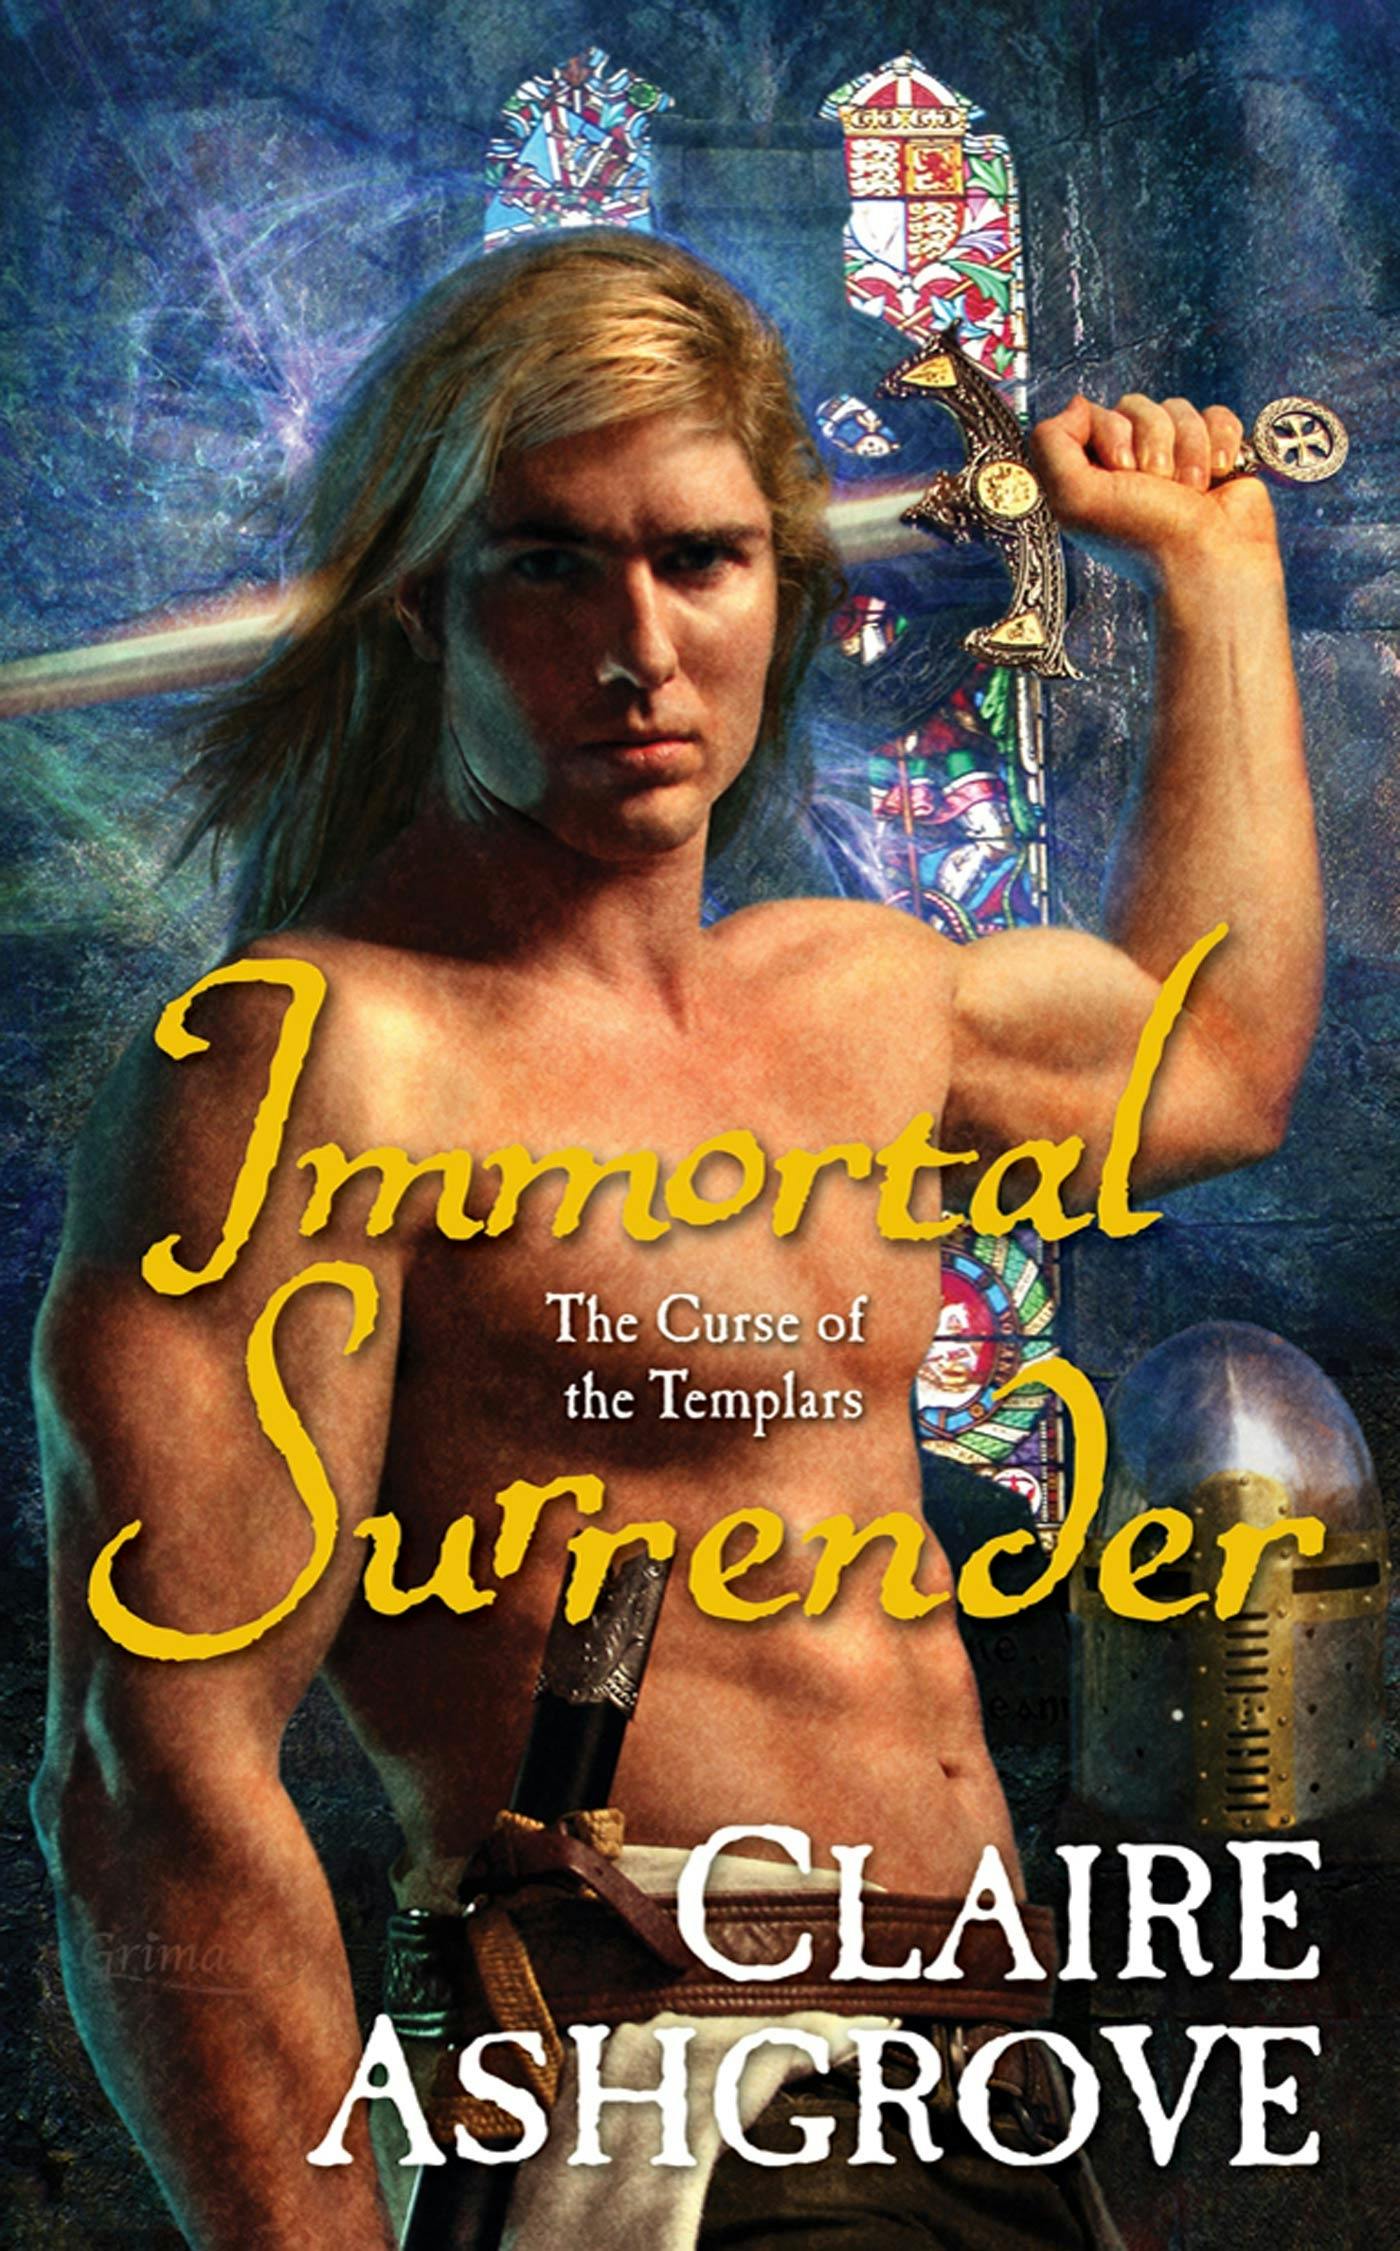 Cover for the book titled as: Immortal Surrender